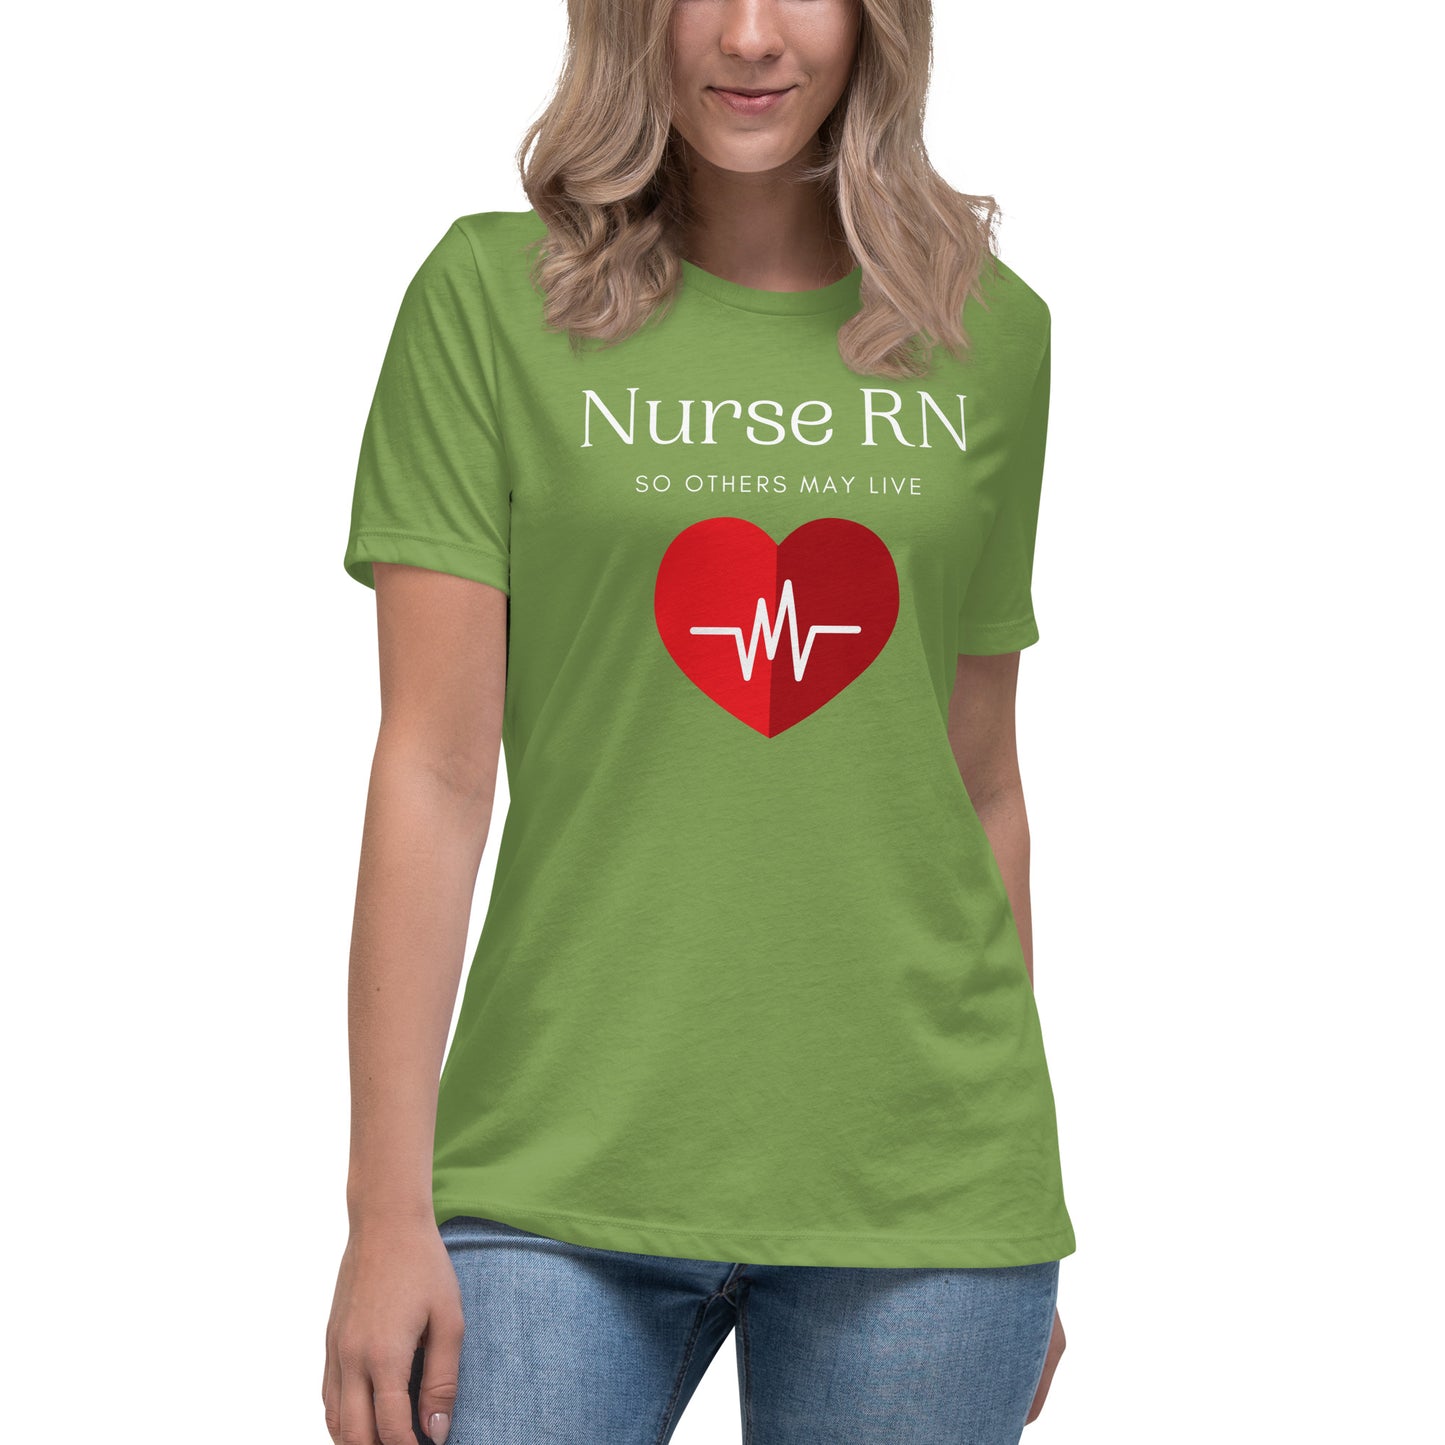 Nurse RN, So Others May Live Women's Relaxed T-Shirt